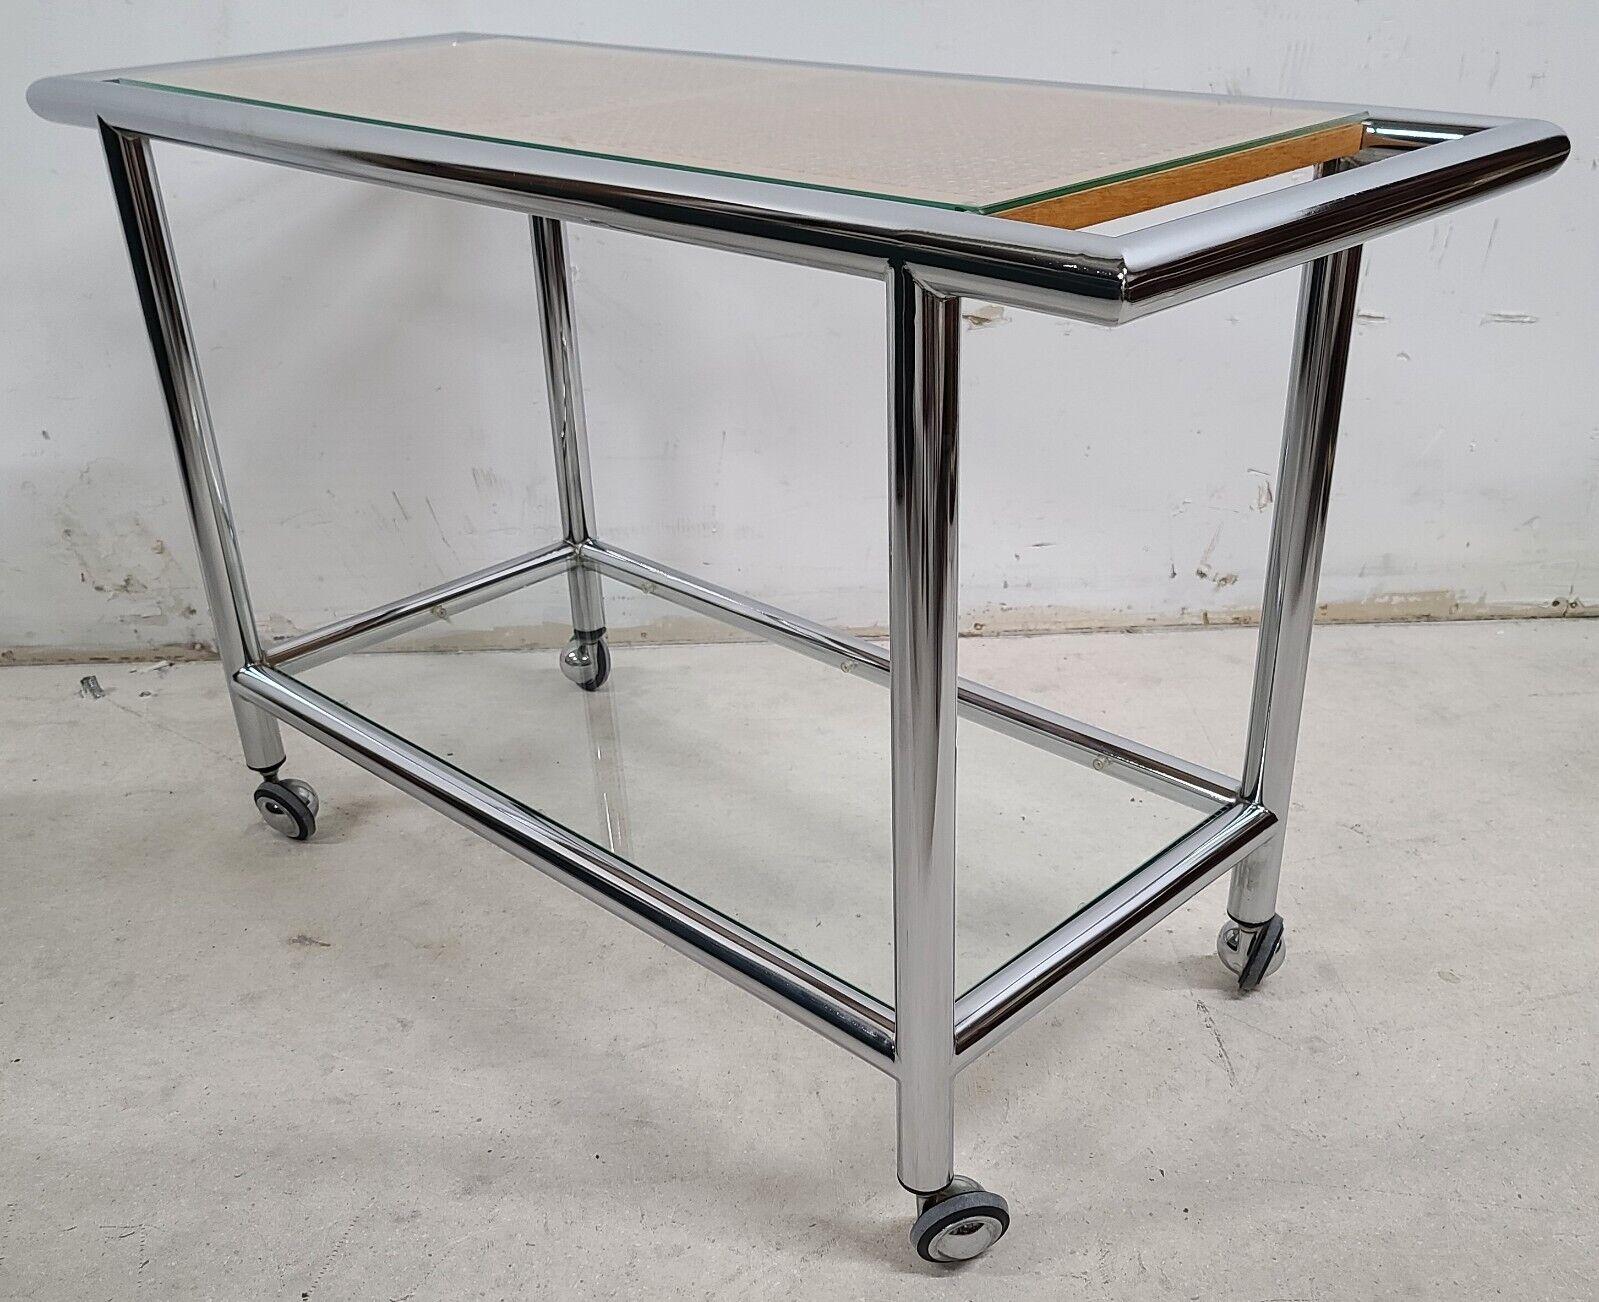 For FULL item description click on READ MORE below. 

Offering One Of Our Recent Palm Beach Estate Fine Furniture Acquisitions Of A

MCM 1970s Chrome Wicker Glass Rolling Bar Serving Cart
Featuring very high-quality chrome frame and chrome Shepard